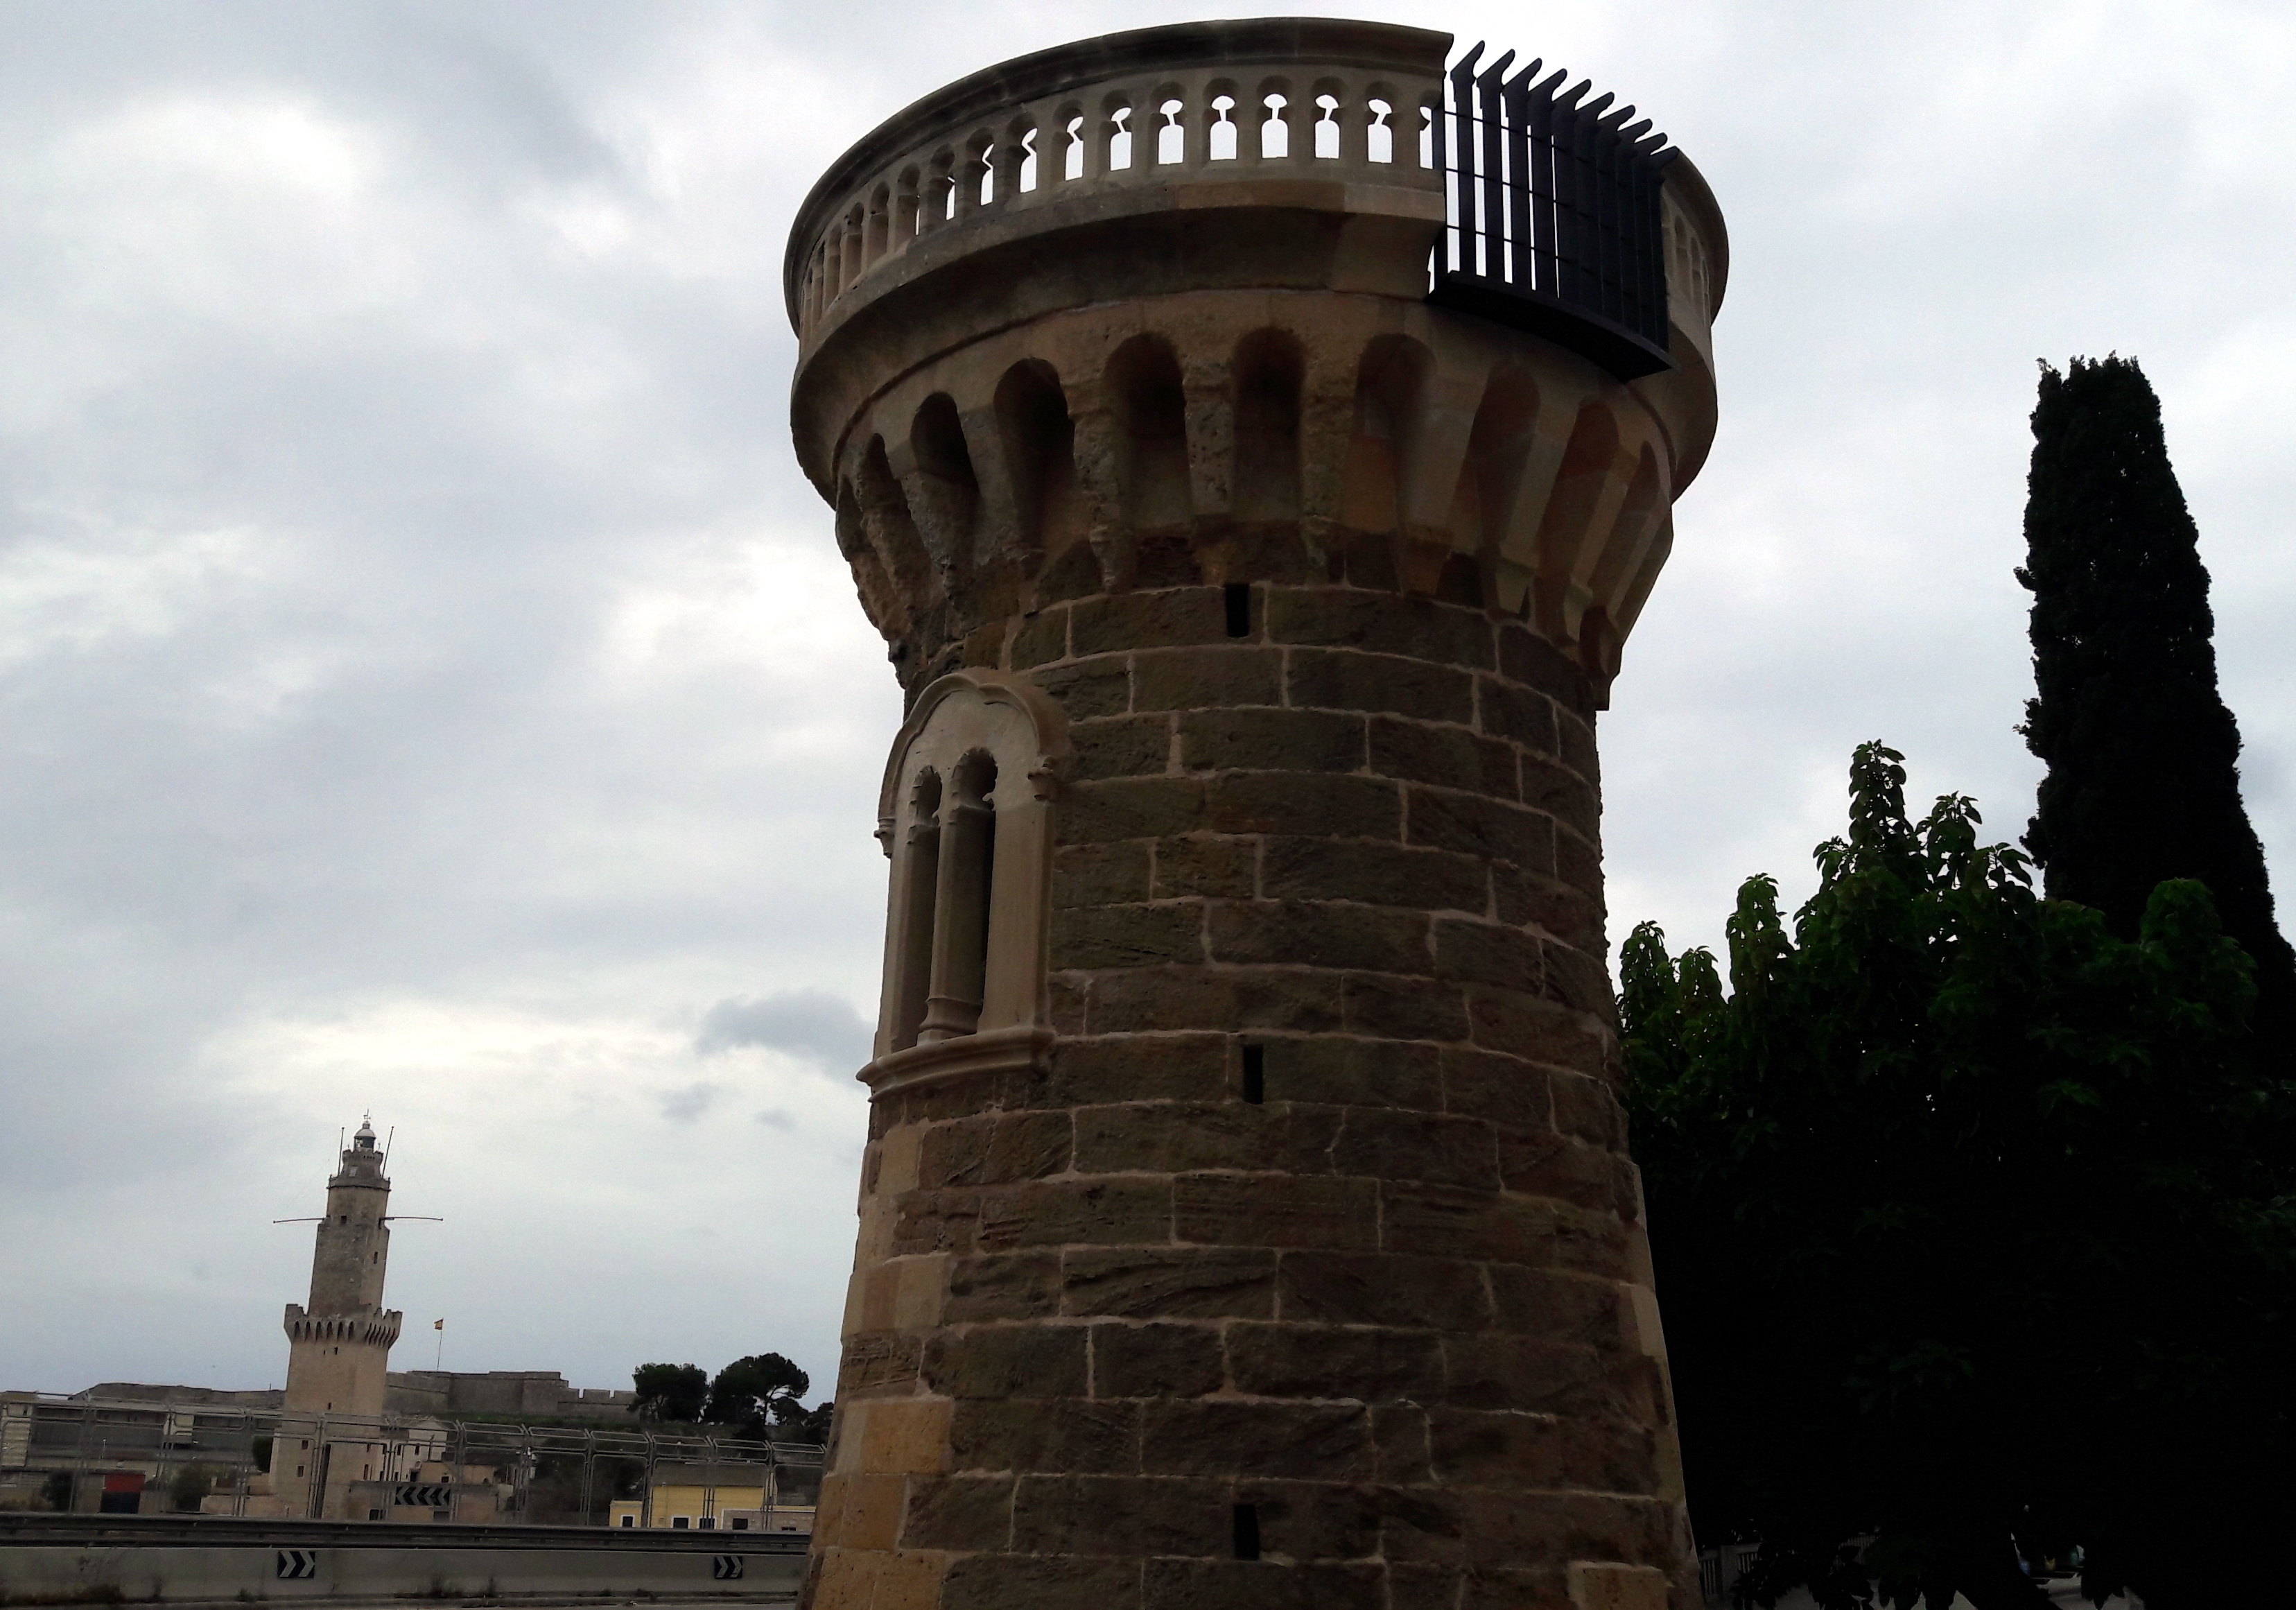 Refurbishment works complete on the Torreón de Paraires in the Port of Palma